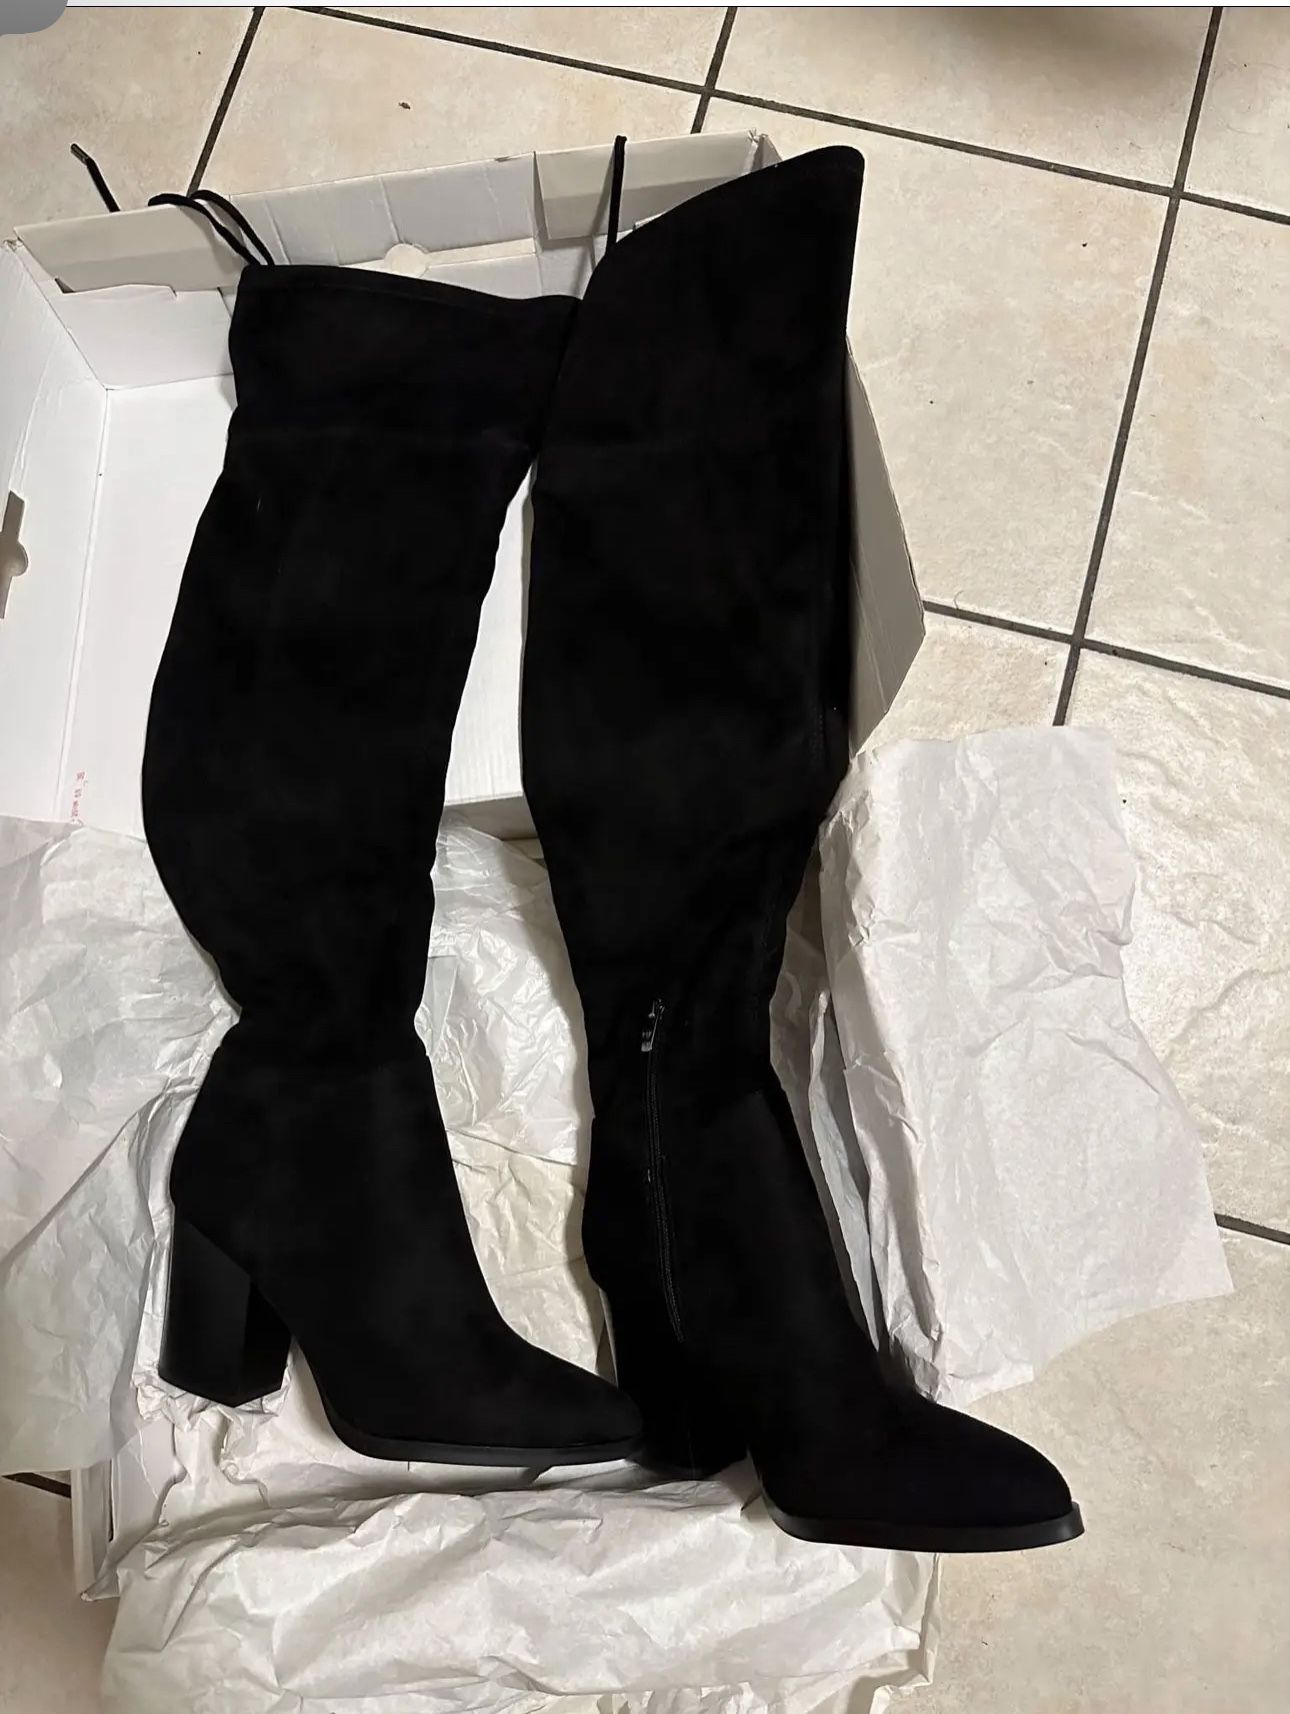 Marc Fisher Women’s Long Boots Size 10